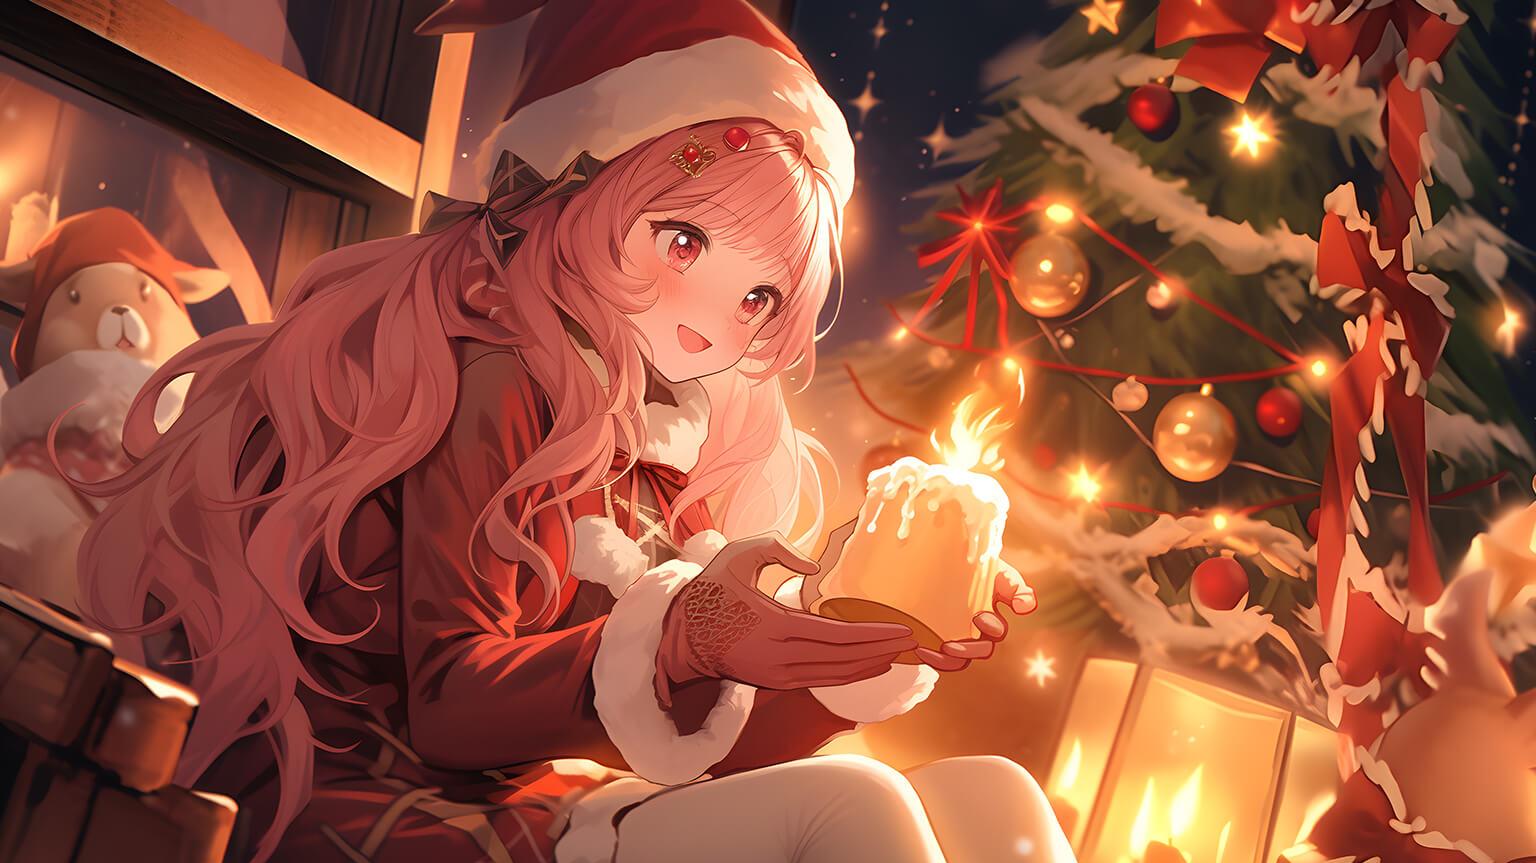 Christmas Anime Girl With Candle Desktop Wallpaper In 4k